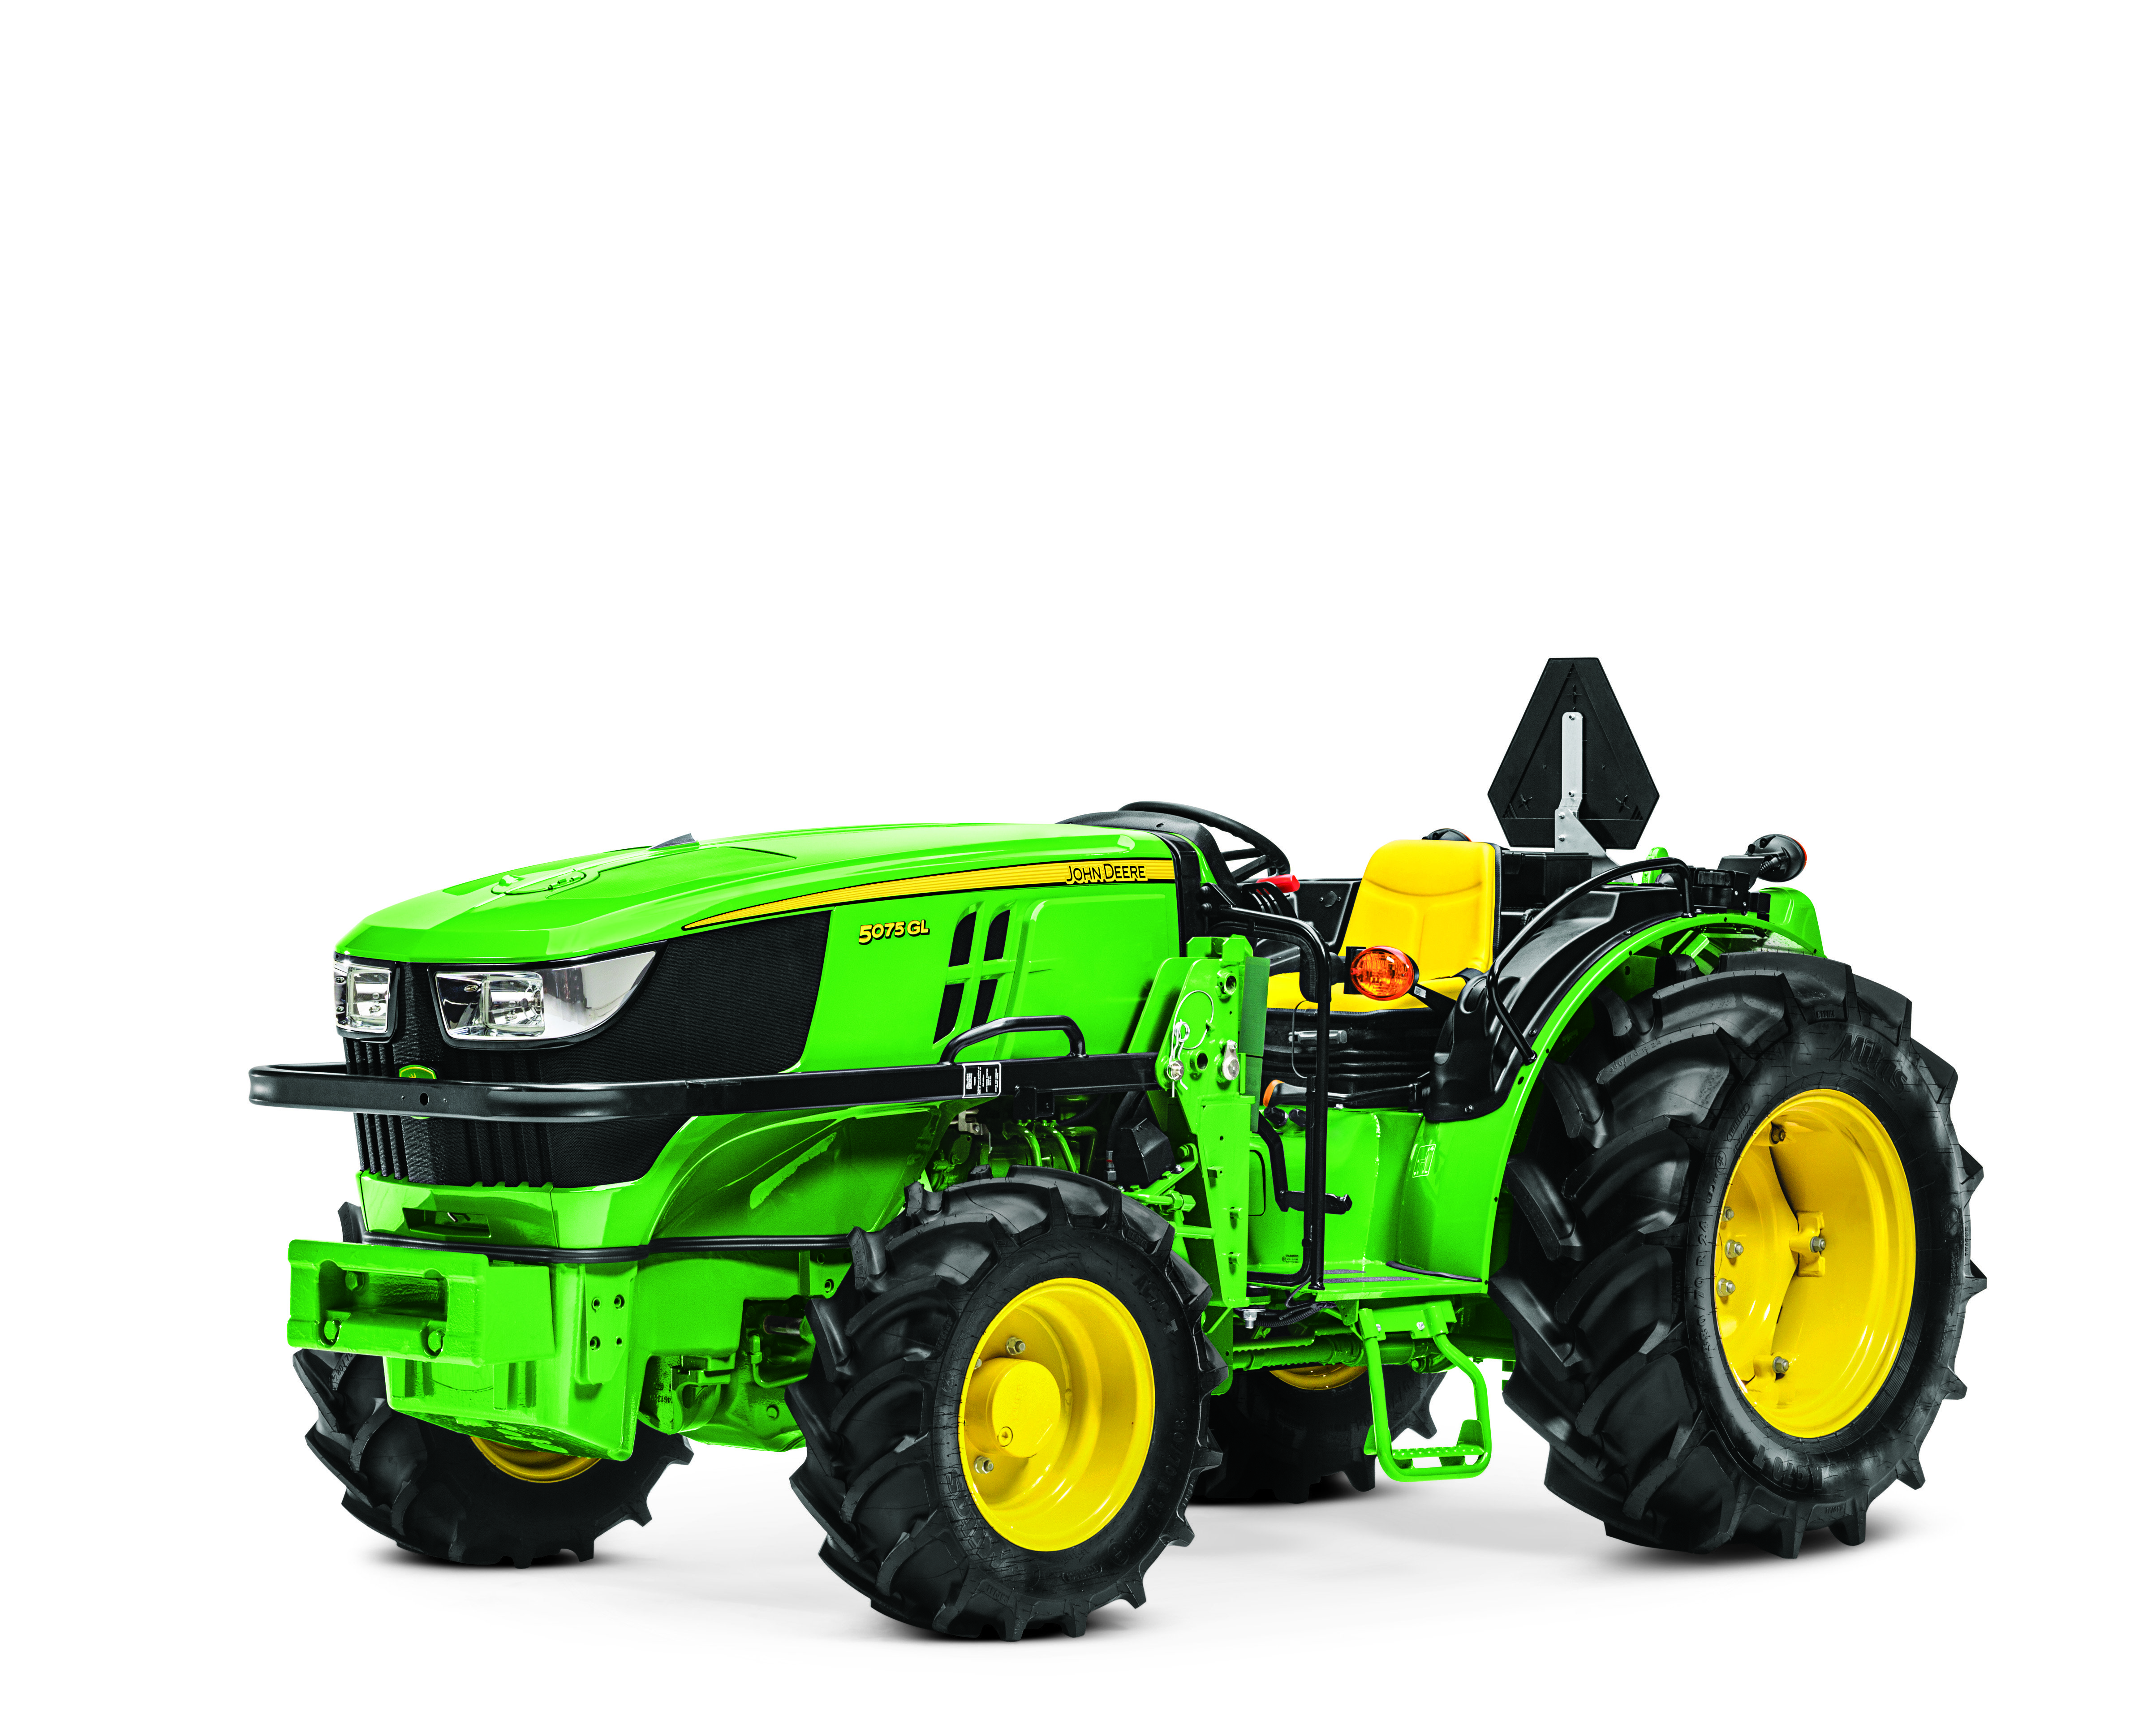 John Deere introduces tractors for orchards, vineyards - Fruit Growers News